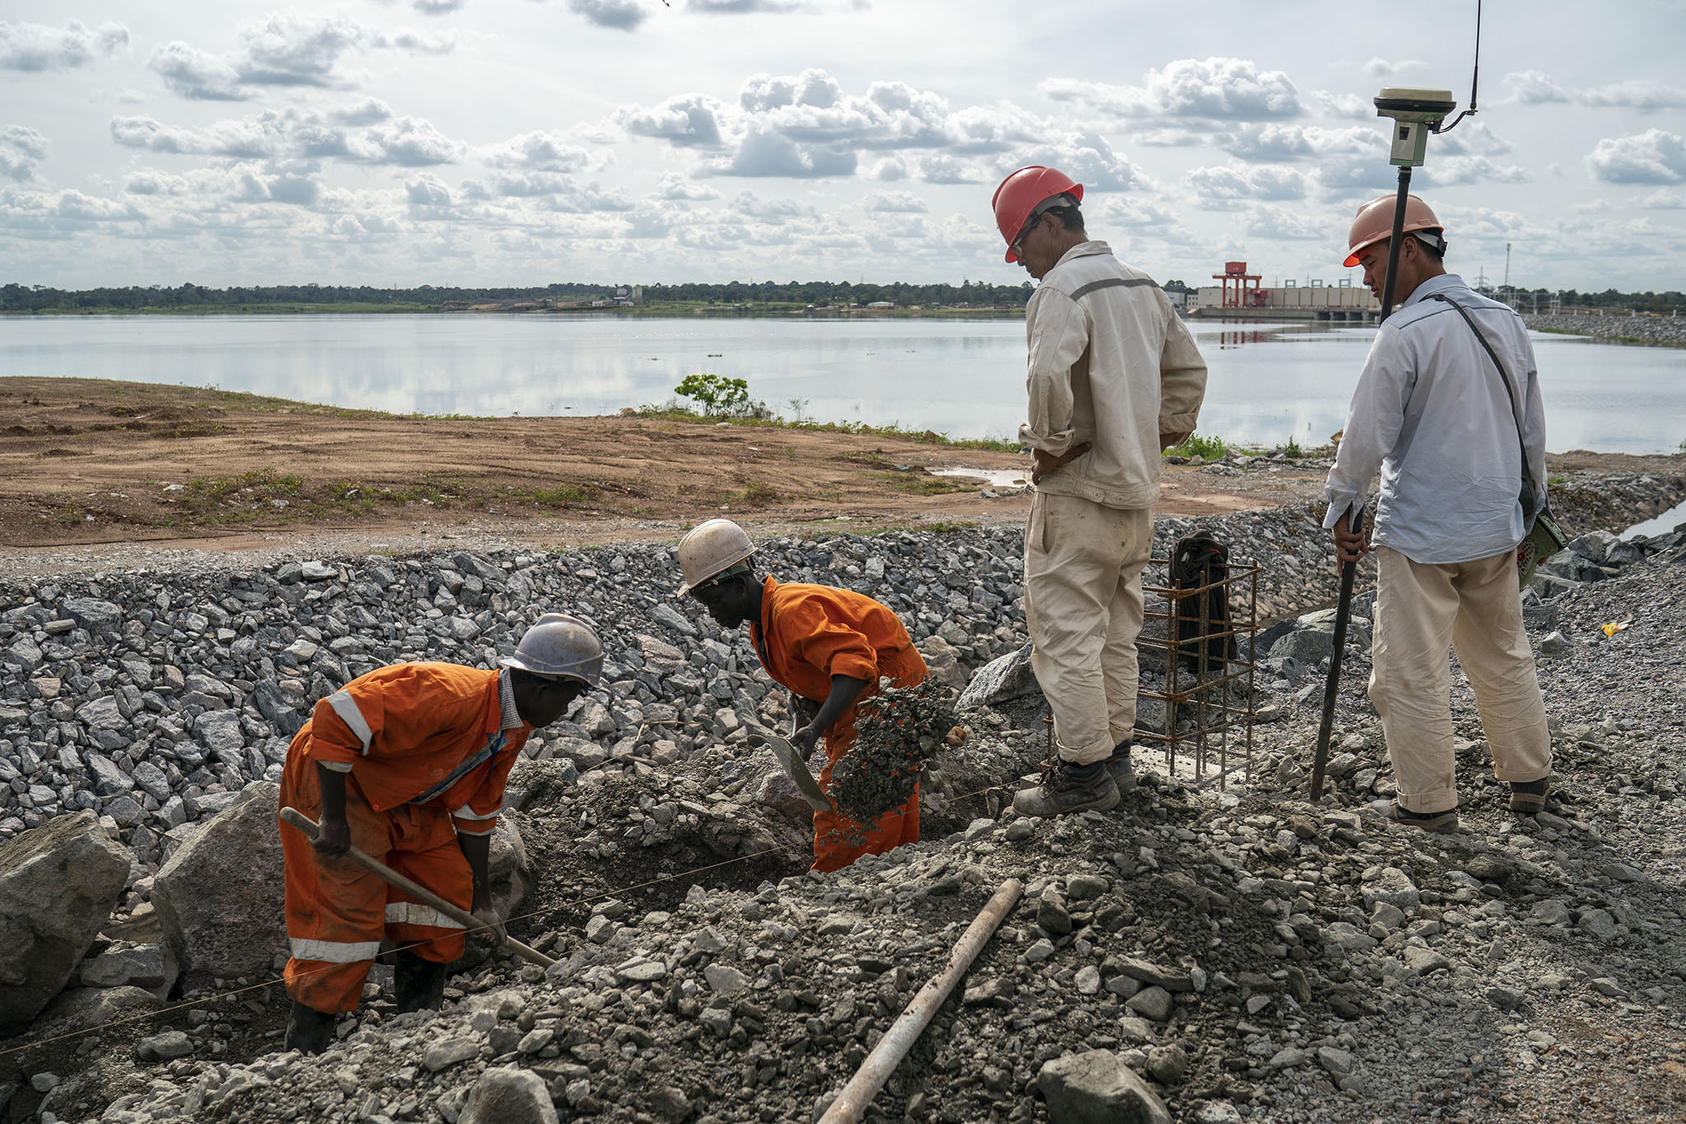 Chinese and Ugandans work on a Chinese-funded hydro power project in Uganda. Civil society groups in many African nations seek better transparency in their governments’ finances, including heavy debts contracted with China. (Joao Silva/The New York Times)